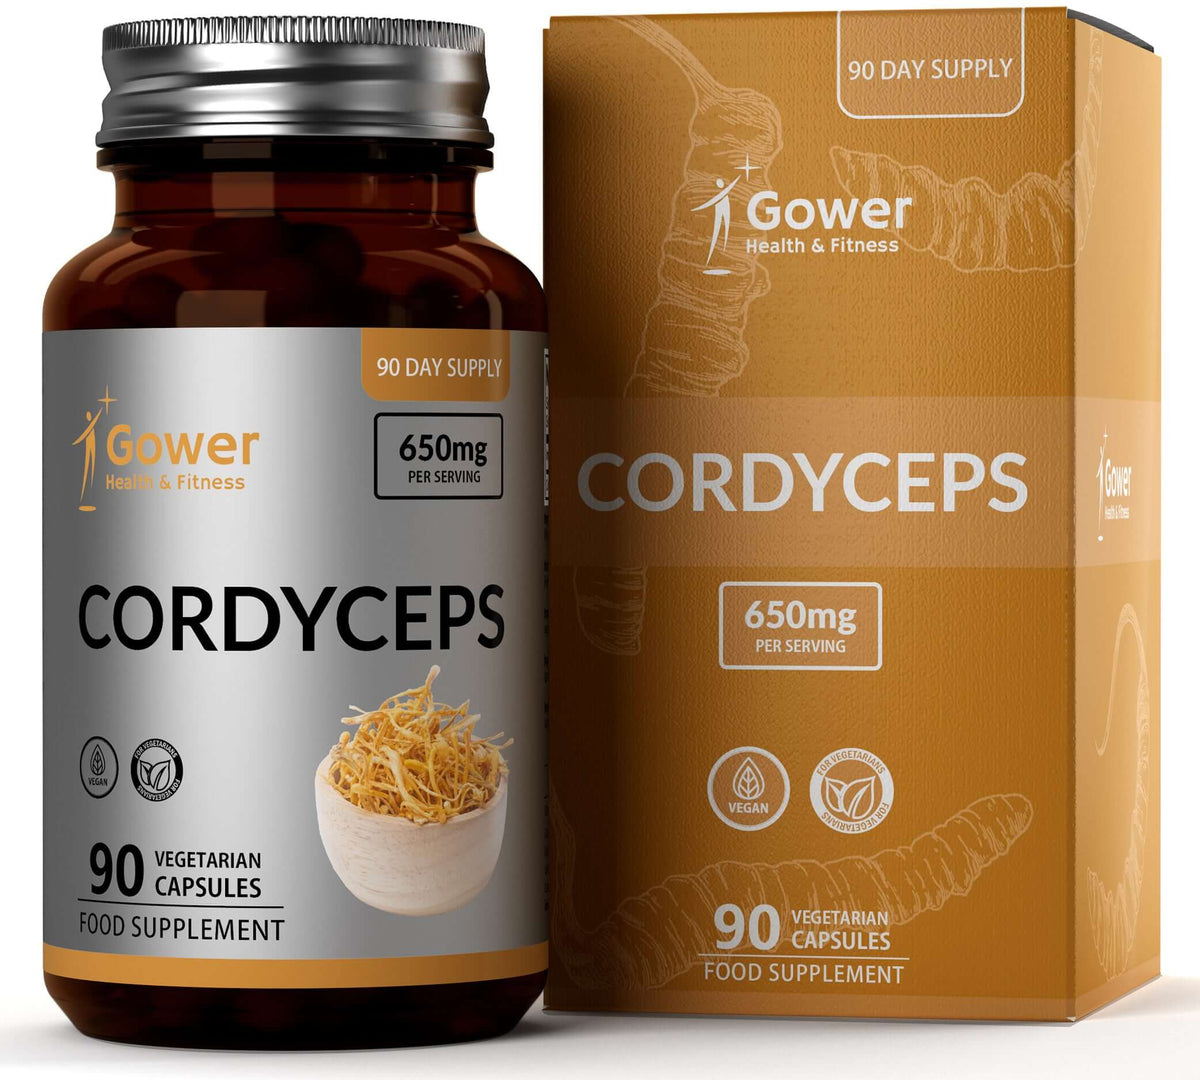 GH Cordyceps Capsules 650mg | Cordyceps Sinensis Extract | 90 Vegan Capsules | Cordyceps Funghi | Manufactured in ISO Licenced Facilities | Non-GMO, Dairy Free & Gluten Free